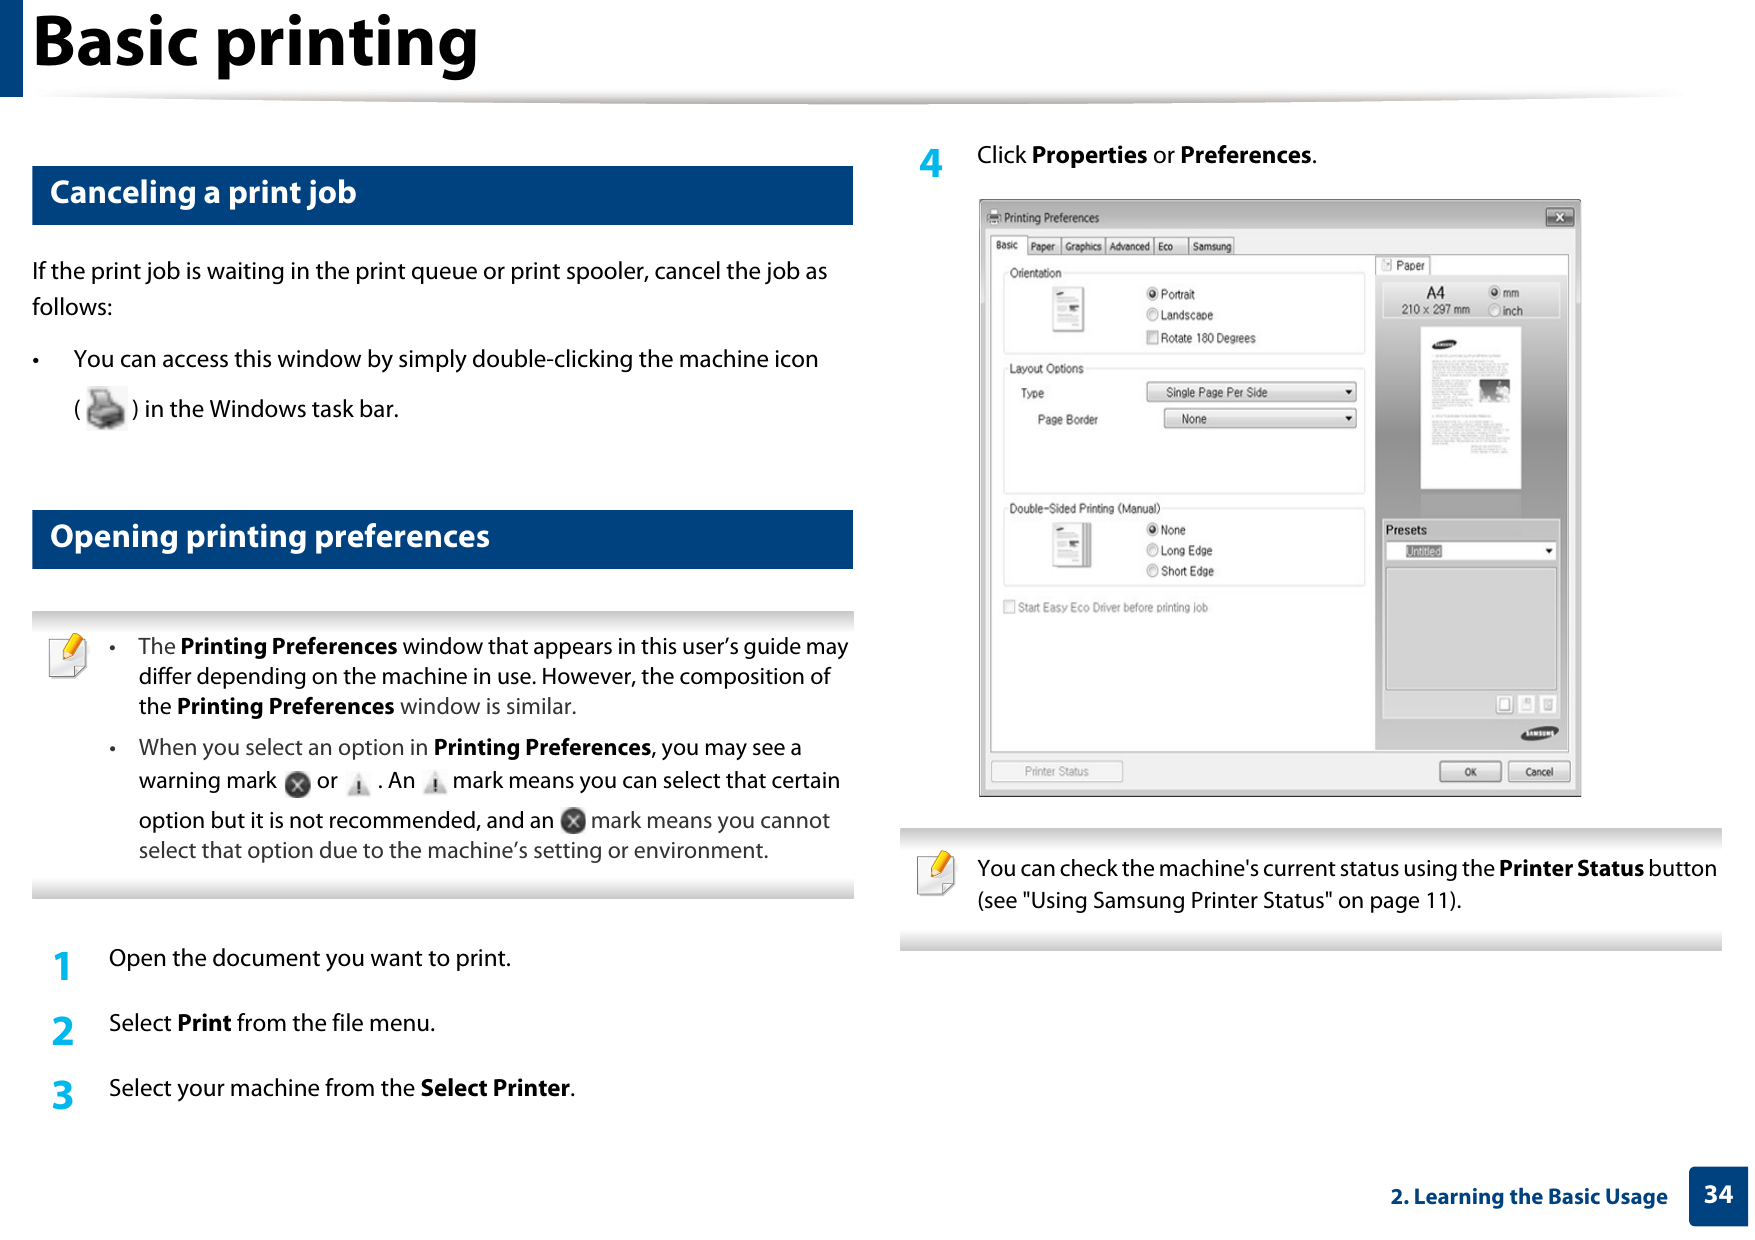 Basic printing342. Learning the Basic Usage7 Canceling a print jobIf the print job is waiting in the print queue or print spooler, cancel the job as follows:• You can access this window by simply double-clicking the machine icon ( ) in the Windows task bar. 8 Opening printing preferences • The Printing Preferences window that appears in this user’s guide may differ depending on the machine in use. However, the composition of the Printing Preferences window is similar.• When you select an option in Printing Preferences, you may see a warning mark   or   . An   mark means you can select that certain option but it is not recommended, and an   mark means you cannot select that option due to the machine’s setting or environment. 1Open the document you want to print.2  Select Print from the file menu.3  Select your machine from the Select Printer. 4  Click Properties or Preferences.  You can check the machine&apos;s current status using the Printer Status button (see &quot;Using Samsung Printer Status&quot; on page 11). 